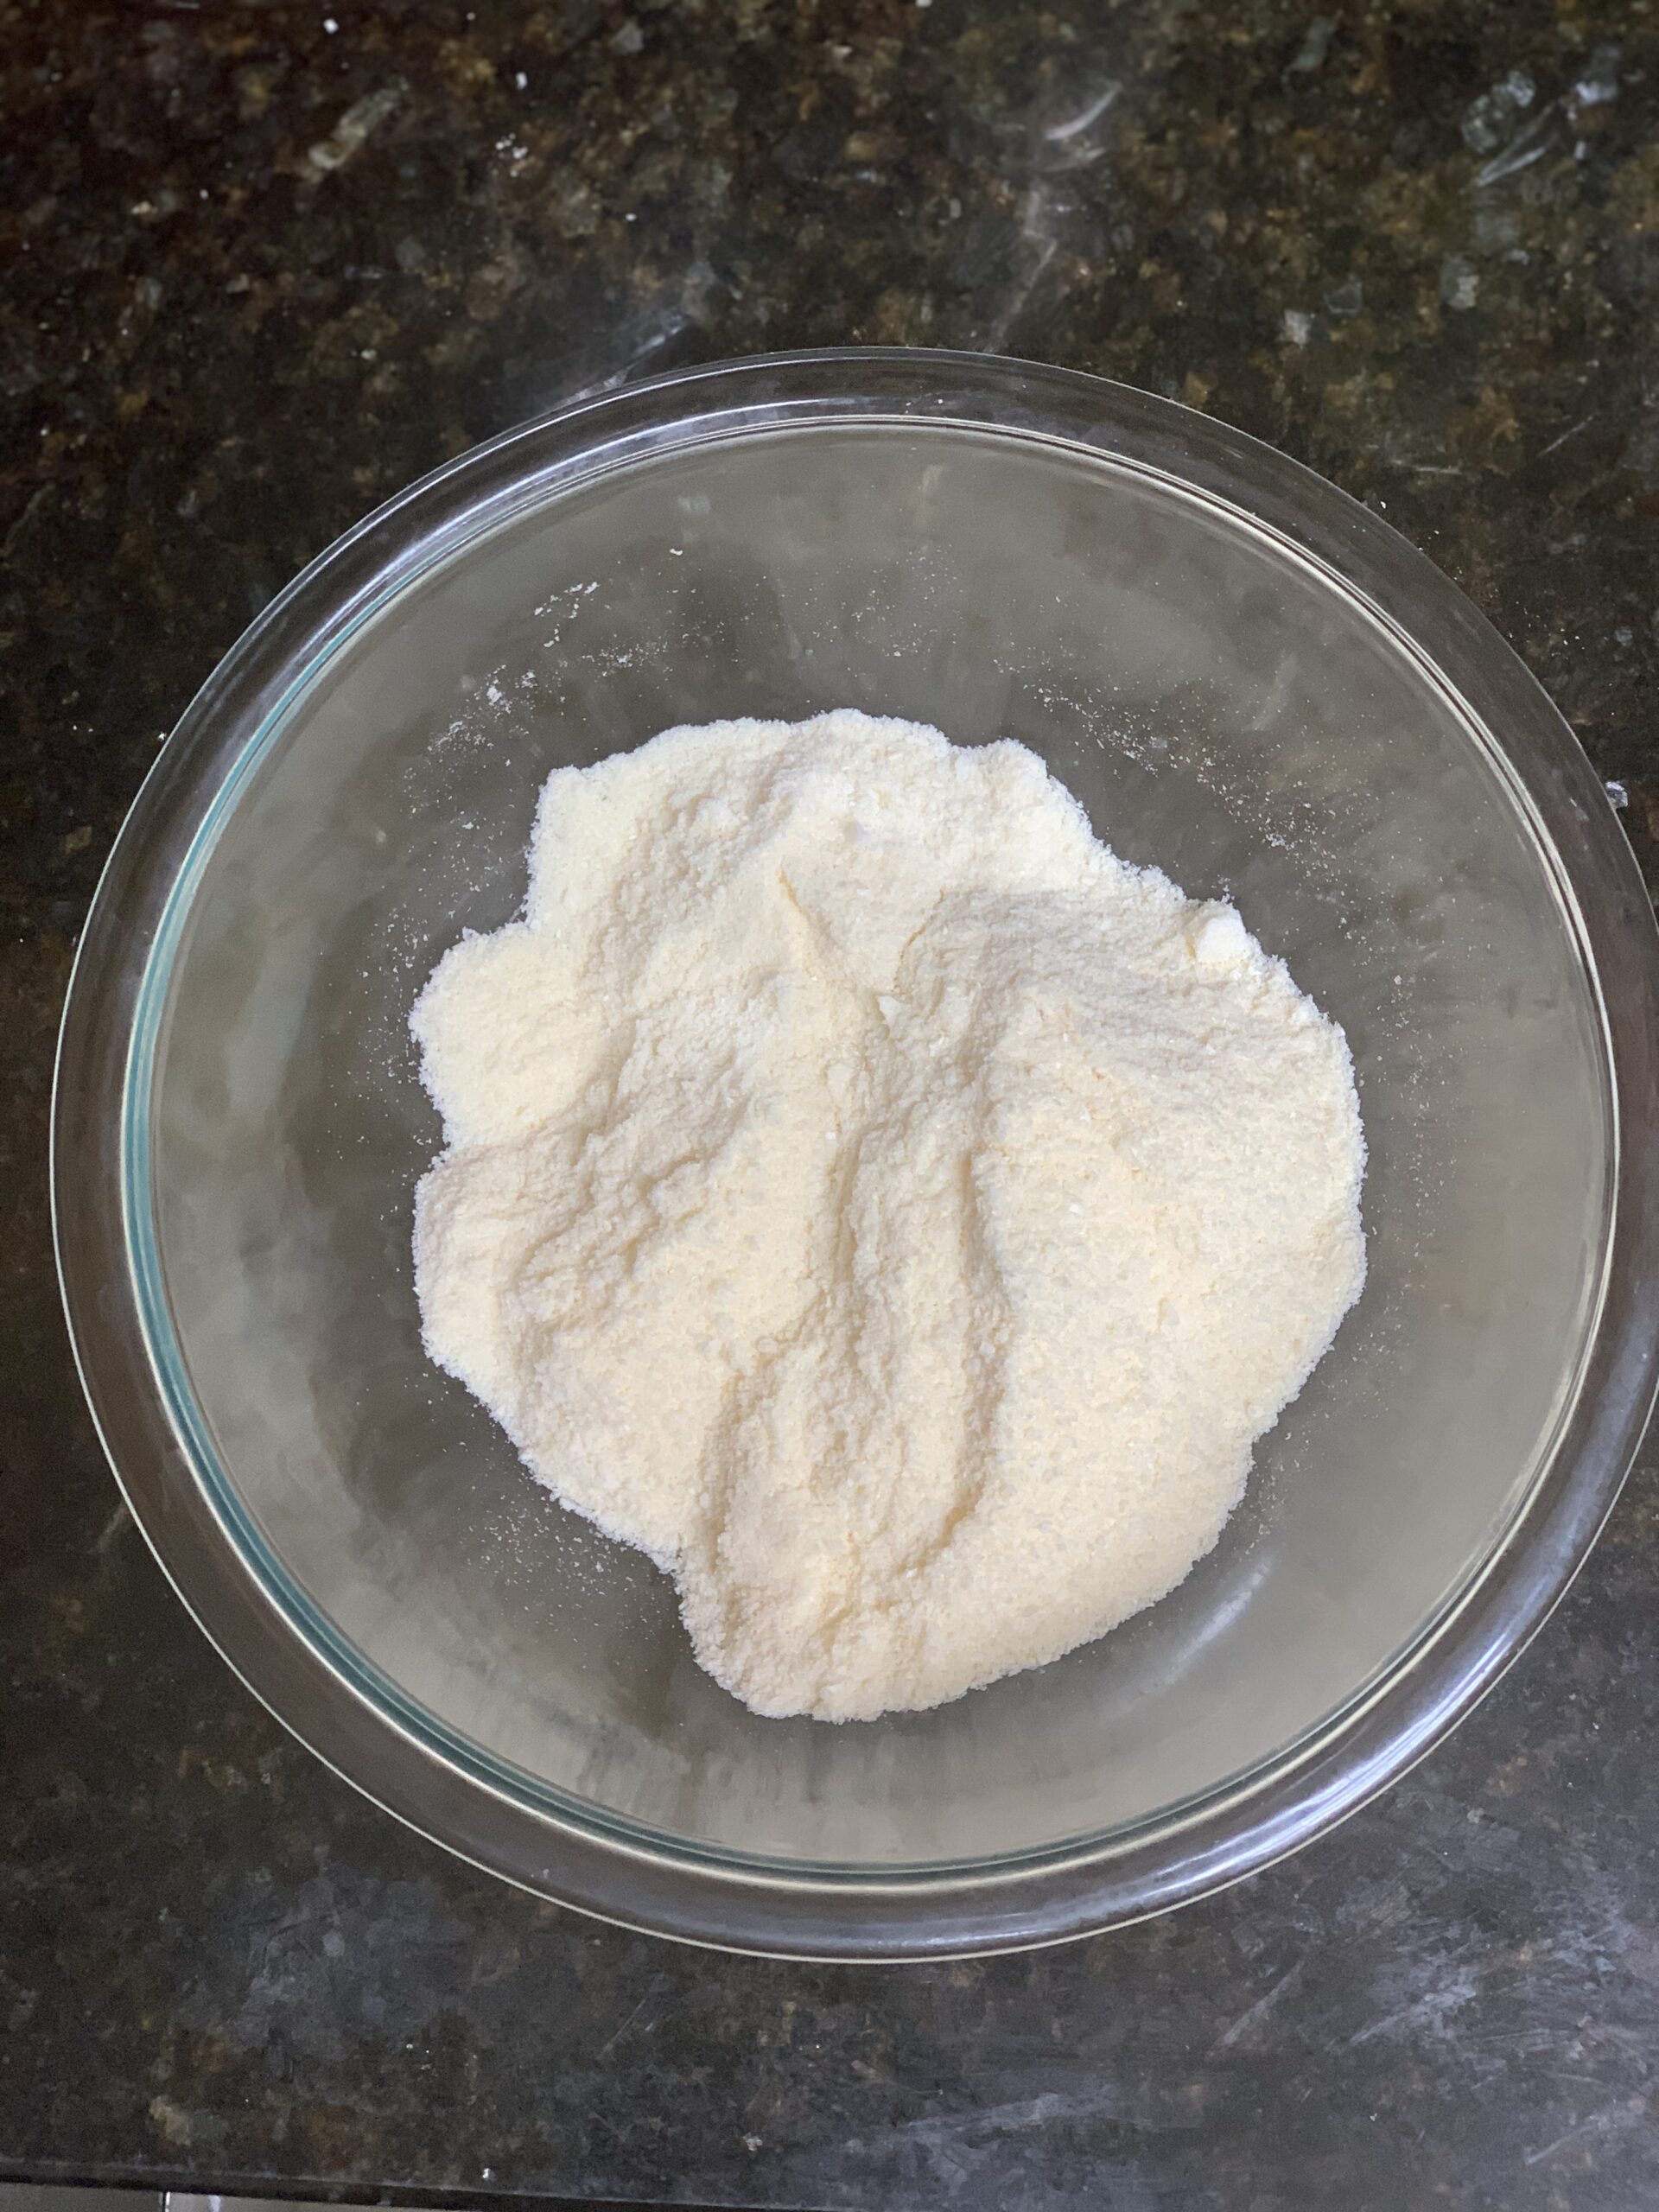 using a freeze dryer at home to turn my breastmilk into homemade baby formula